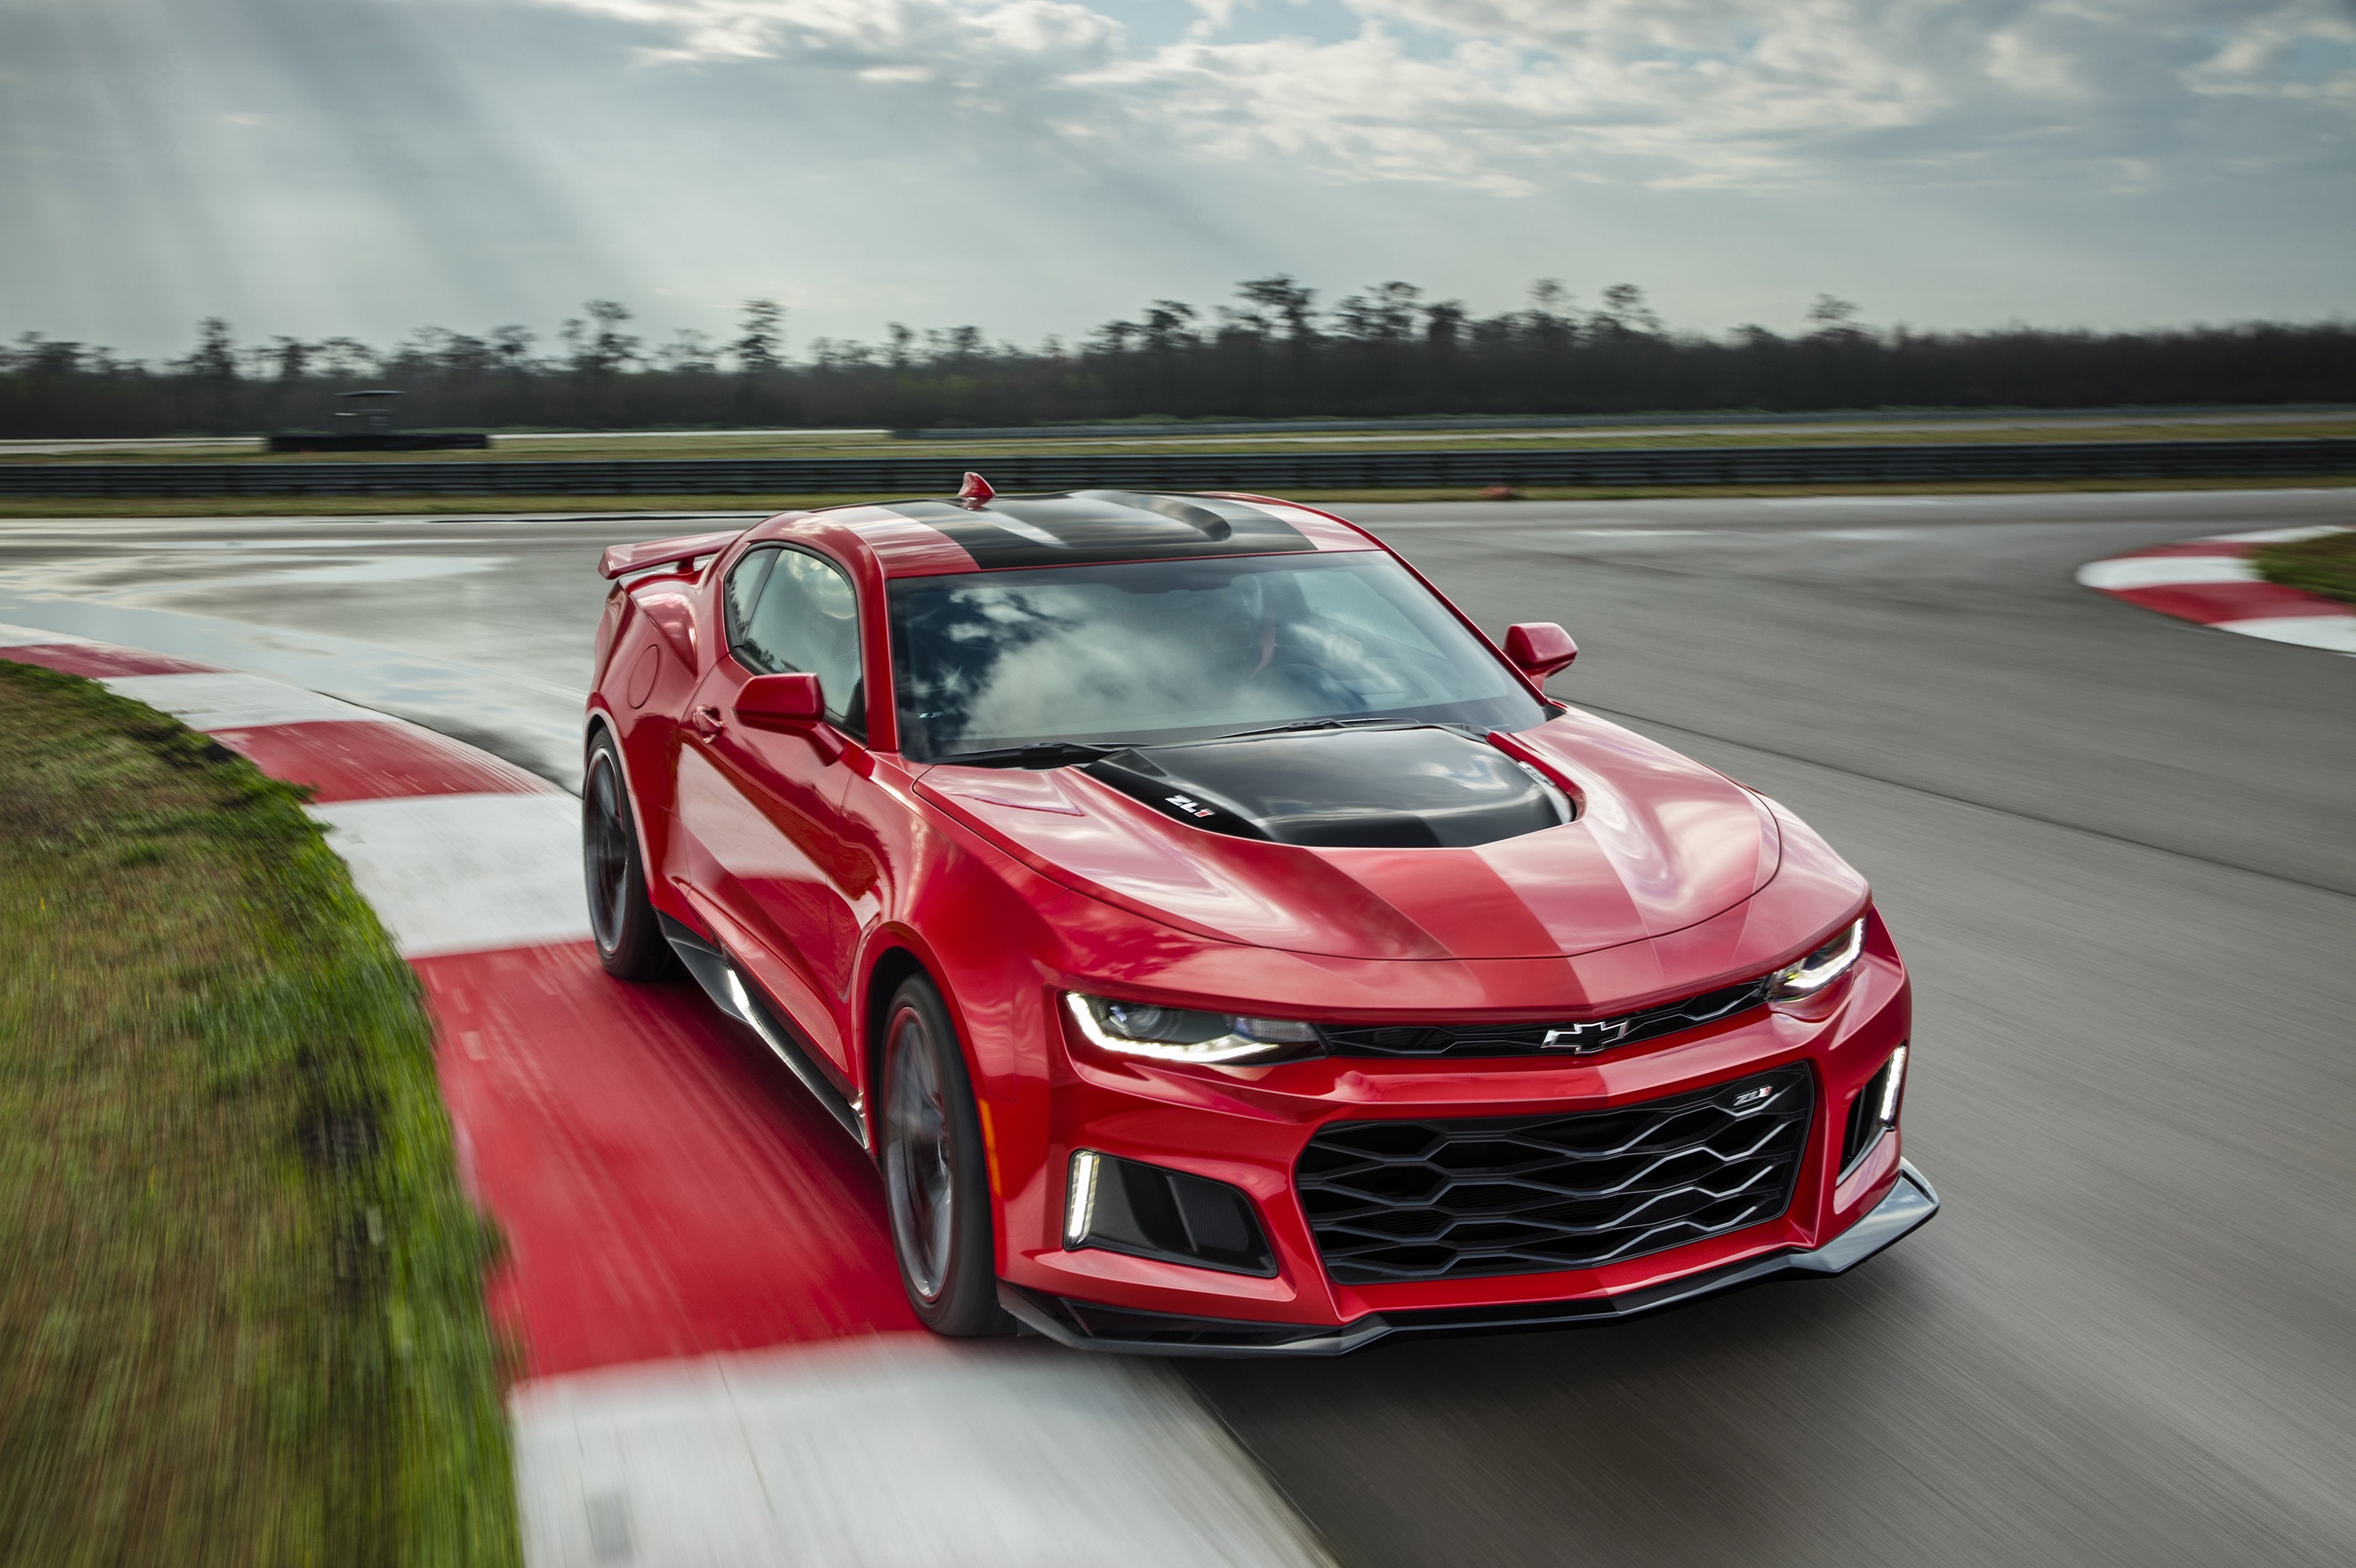 Chevrolet Camaro X Rendering Is Coupe SUV Done Right - autoevolution